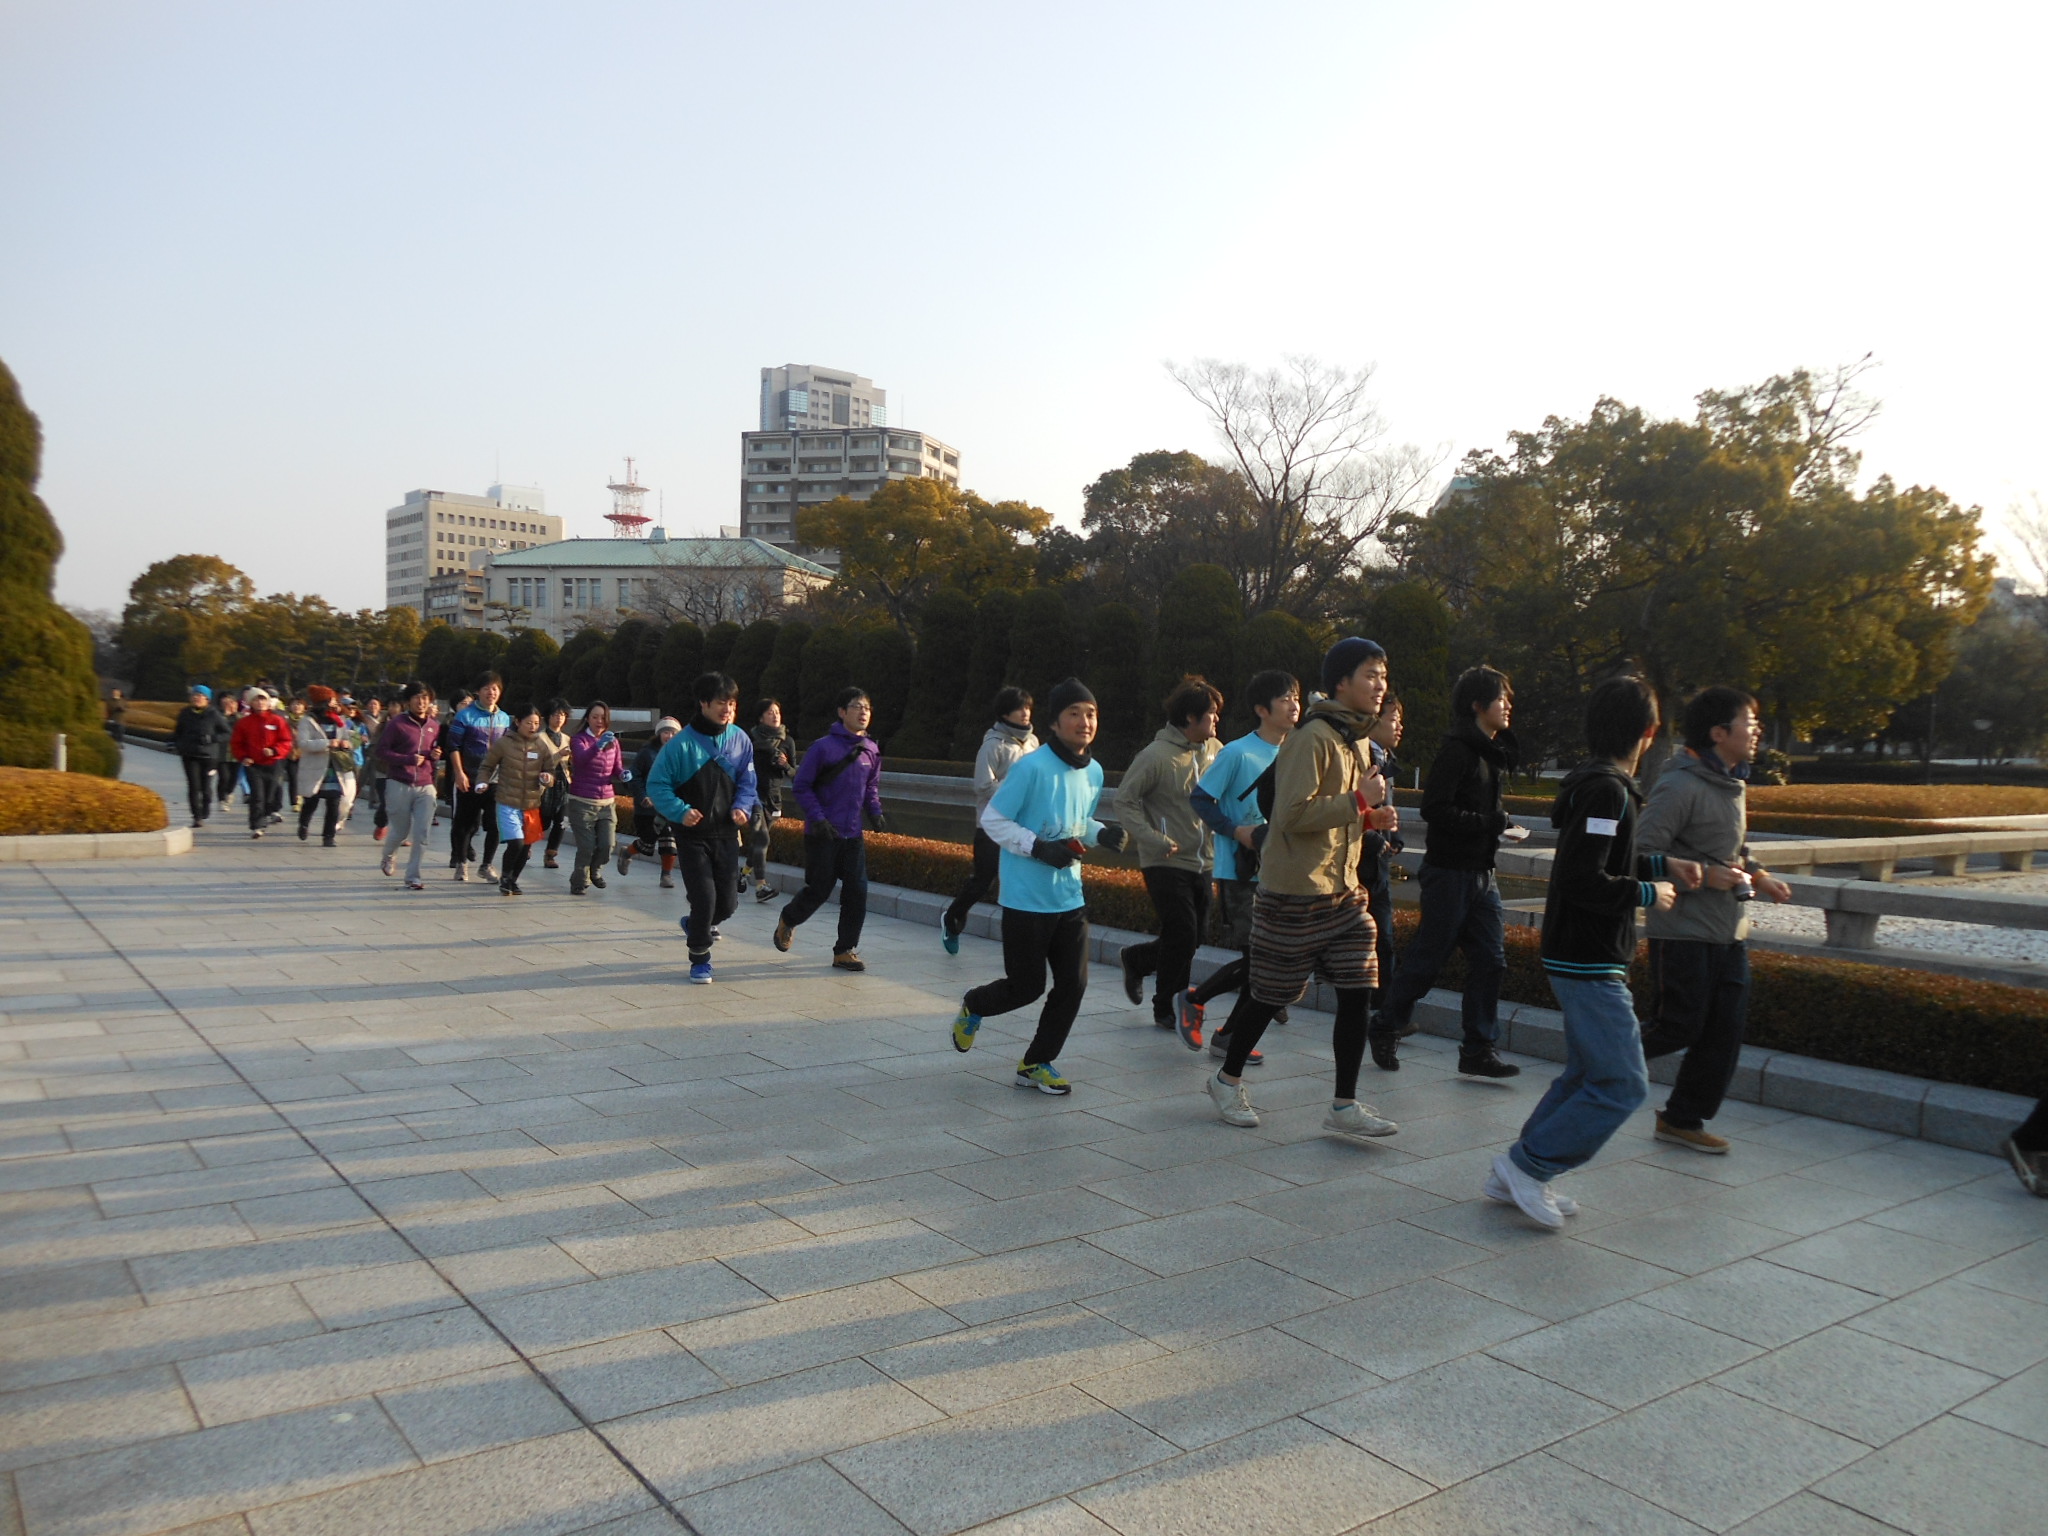 Culture run: A city observation jogging event (Feb. 16) by Atelier Bow Wow's Momoyo Kaijima and Yoshiharu Tsukamoto proves popular with locals. | PHOTO COURTESY OF HIROSHIMA MUSEUM OF CONTEMPORARY ART